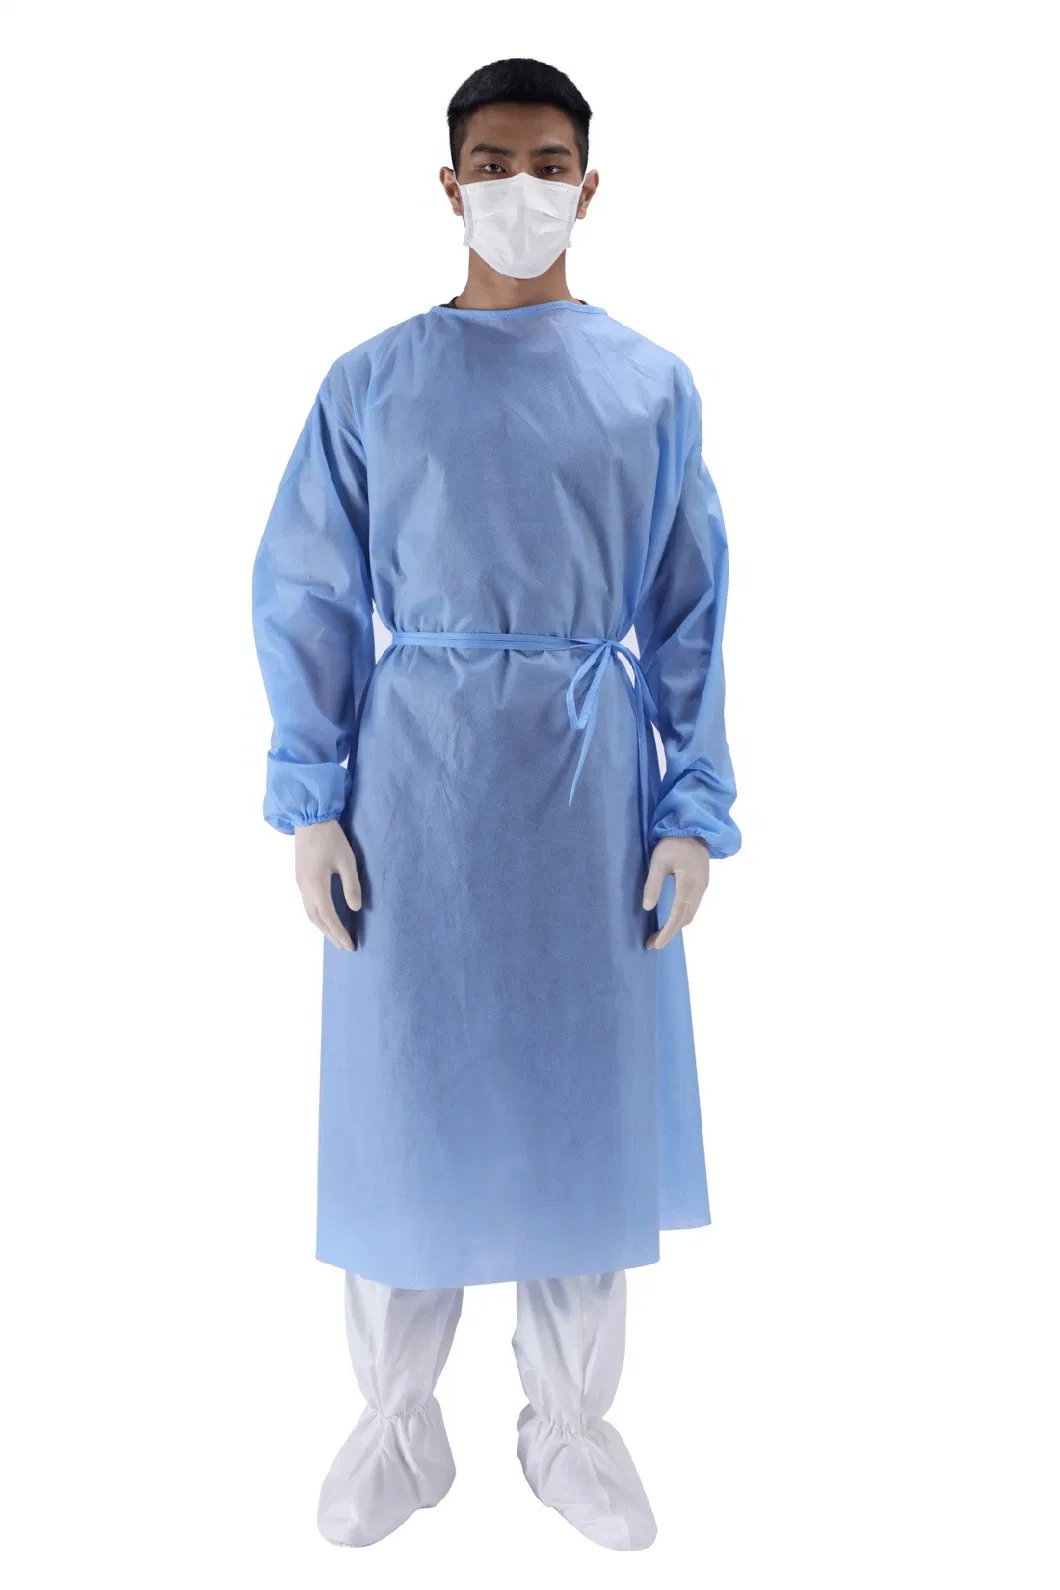 Medical Supplies Eo Sterile Disposable SMS Surgical Medical Gown